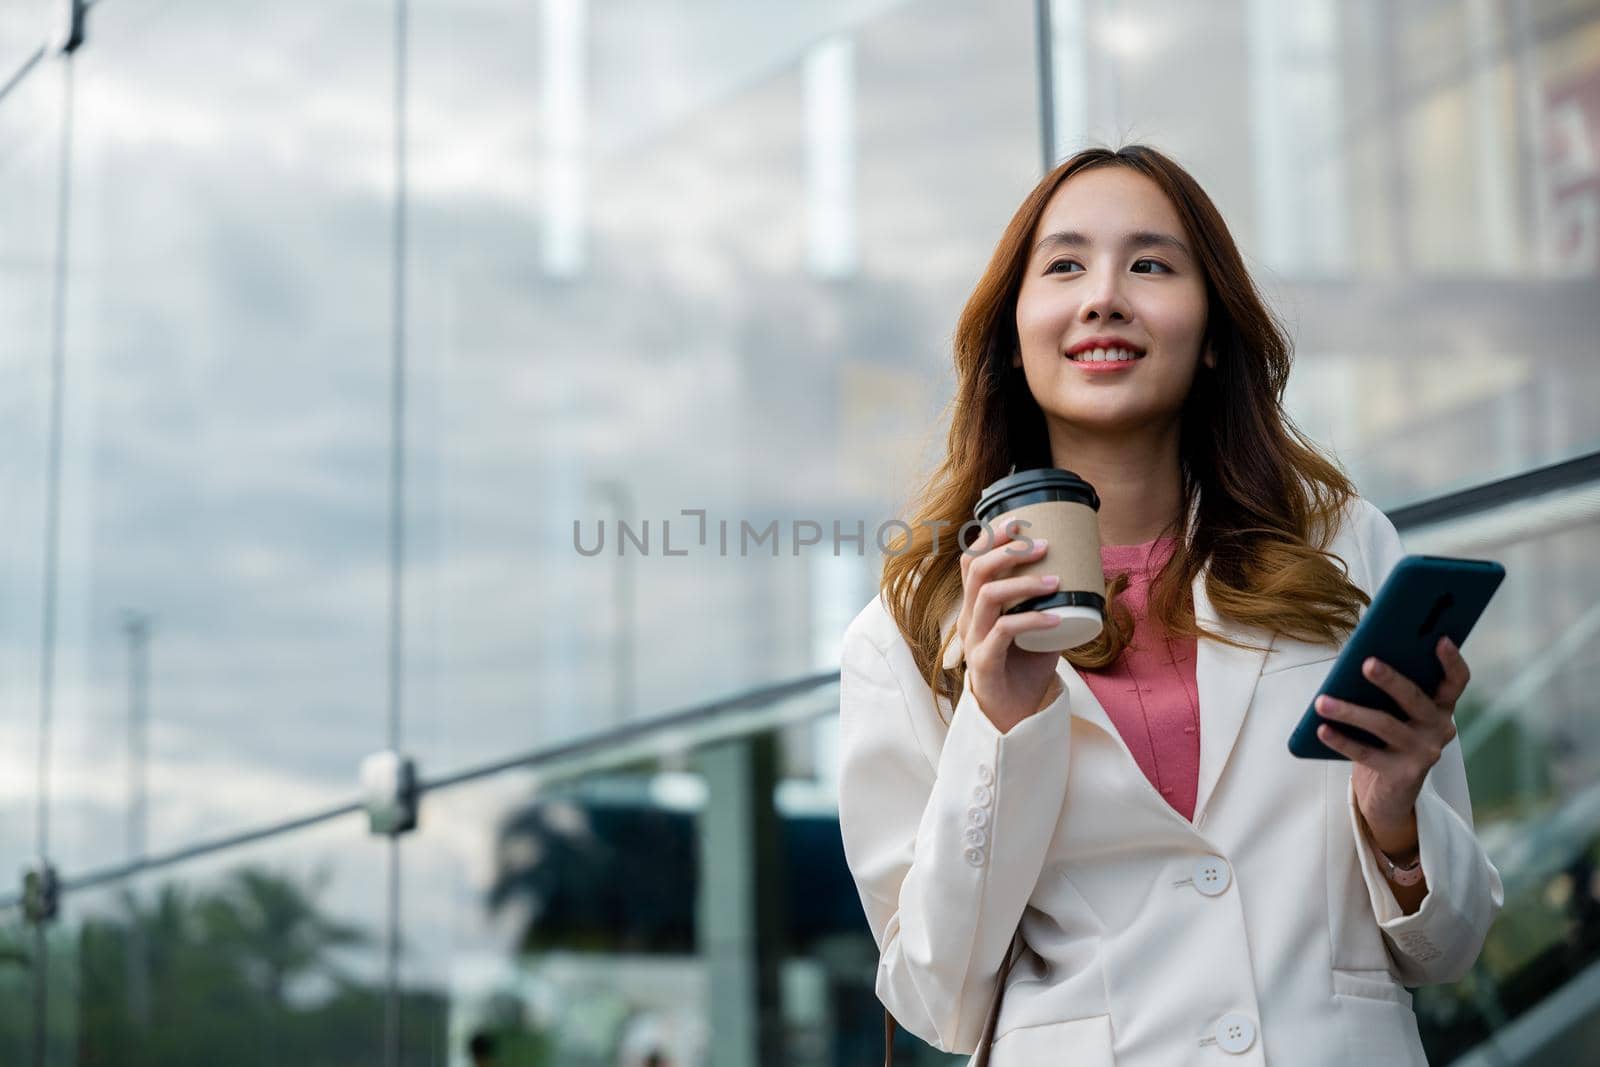 Young business woman smiling holding mobile phone with coffee take away going to work early in morning, Asian businesswoman with smartphone and cup coffee standing against street building near office